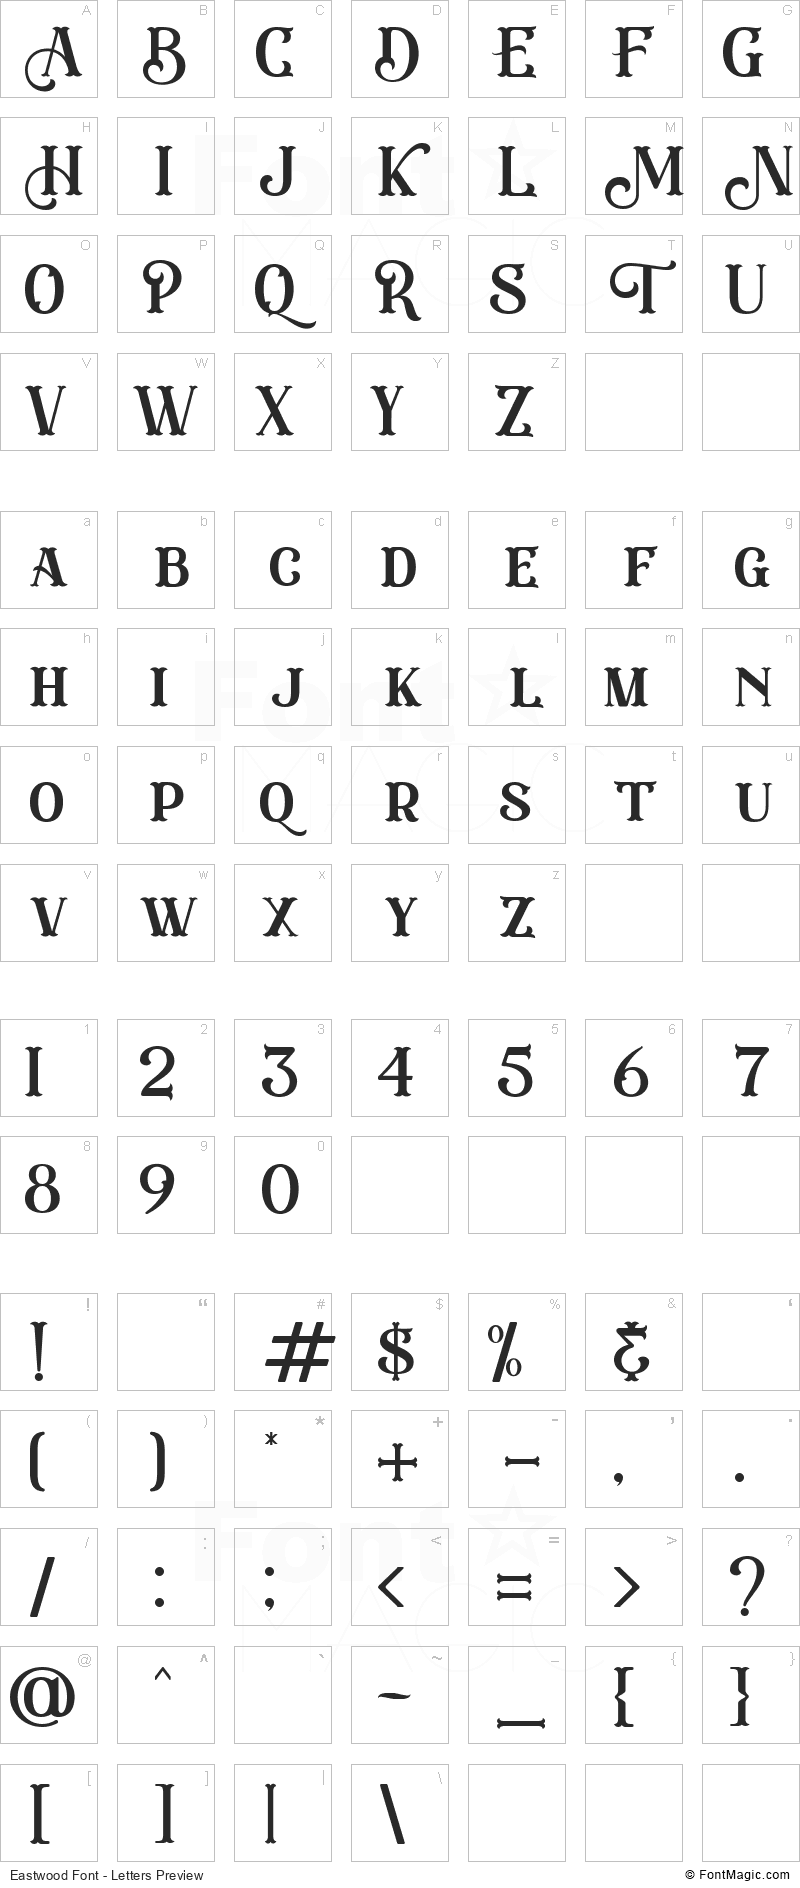 Eastwood Font - All Latters Preview Chart